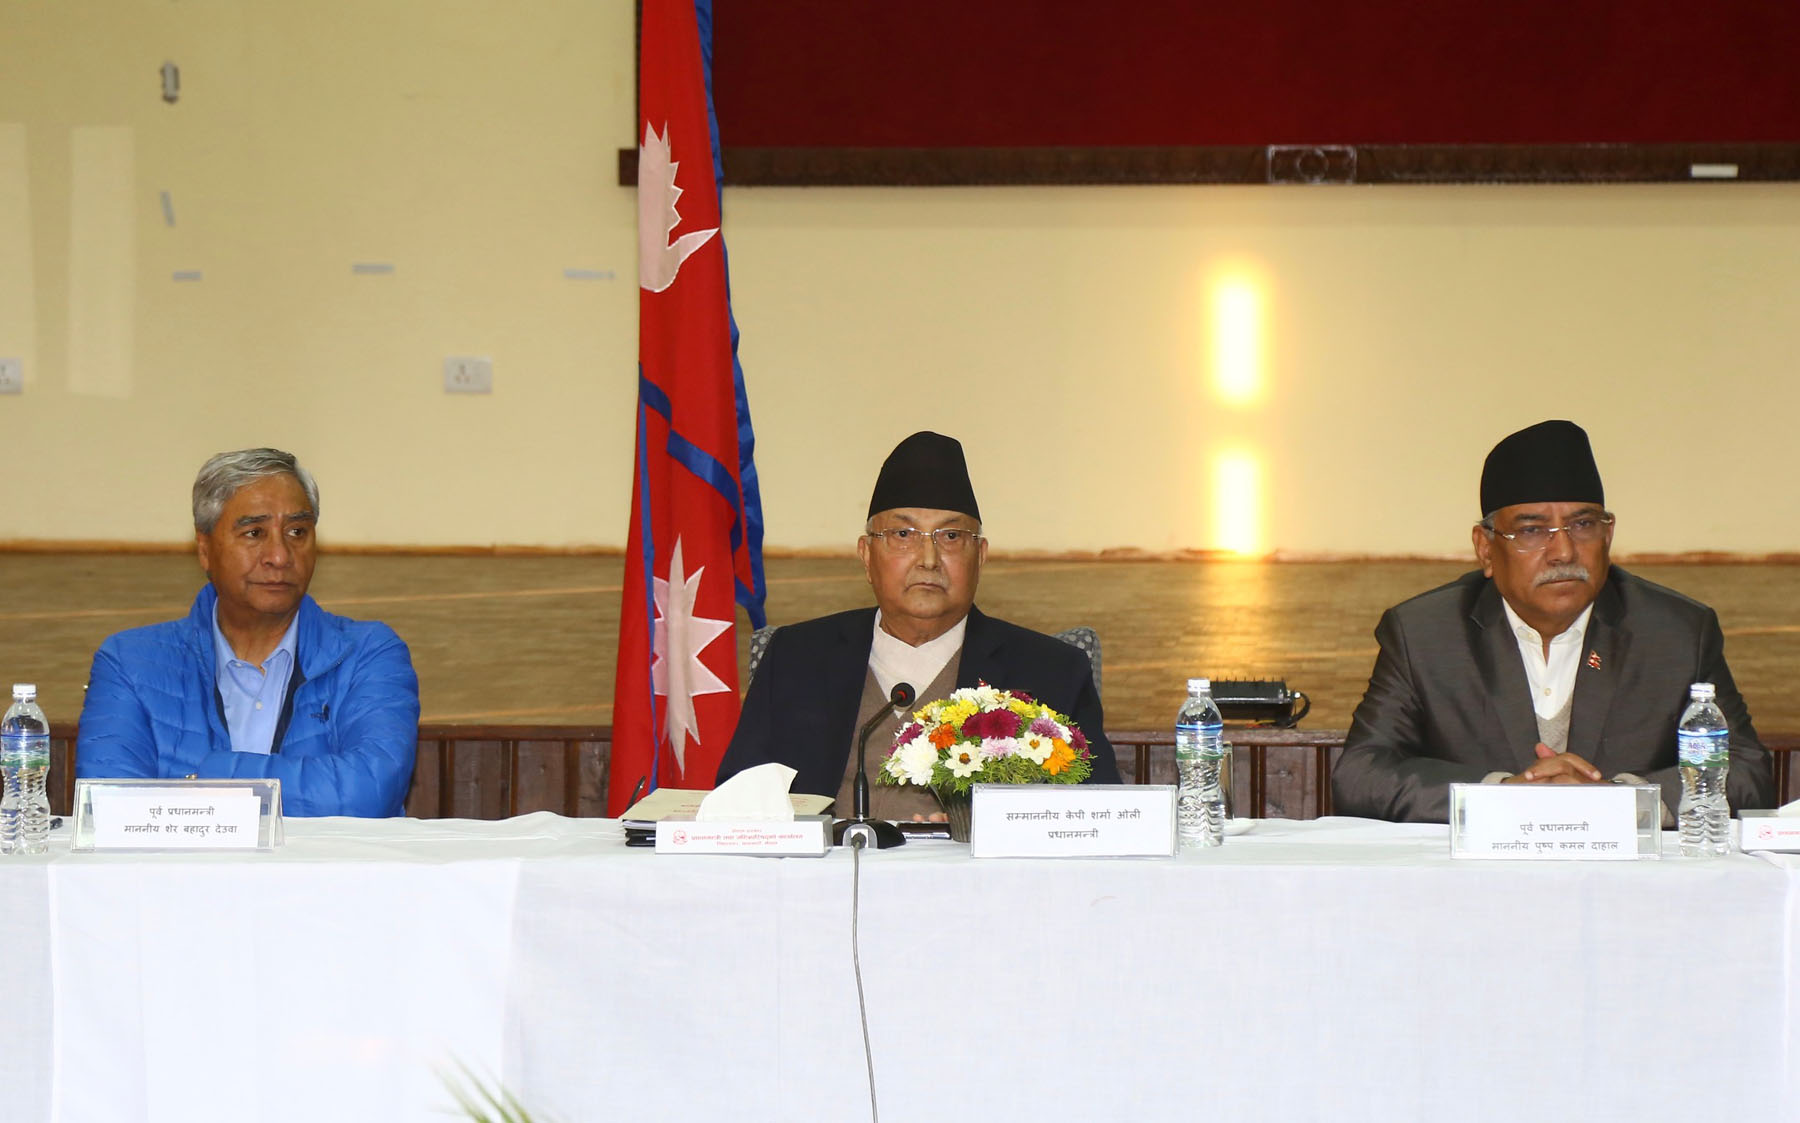 Nepal to hold diplomatic dialogue with India on border issue: PM Oli